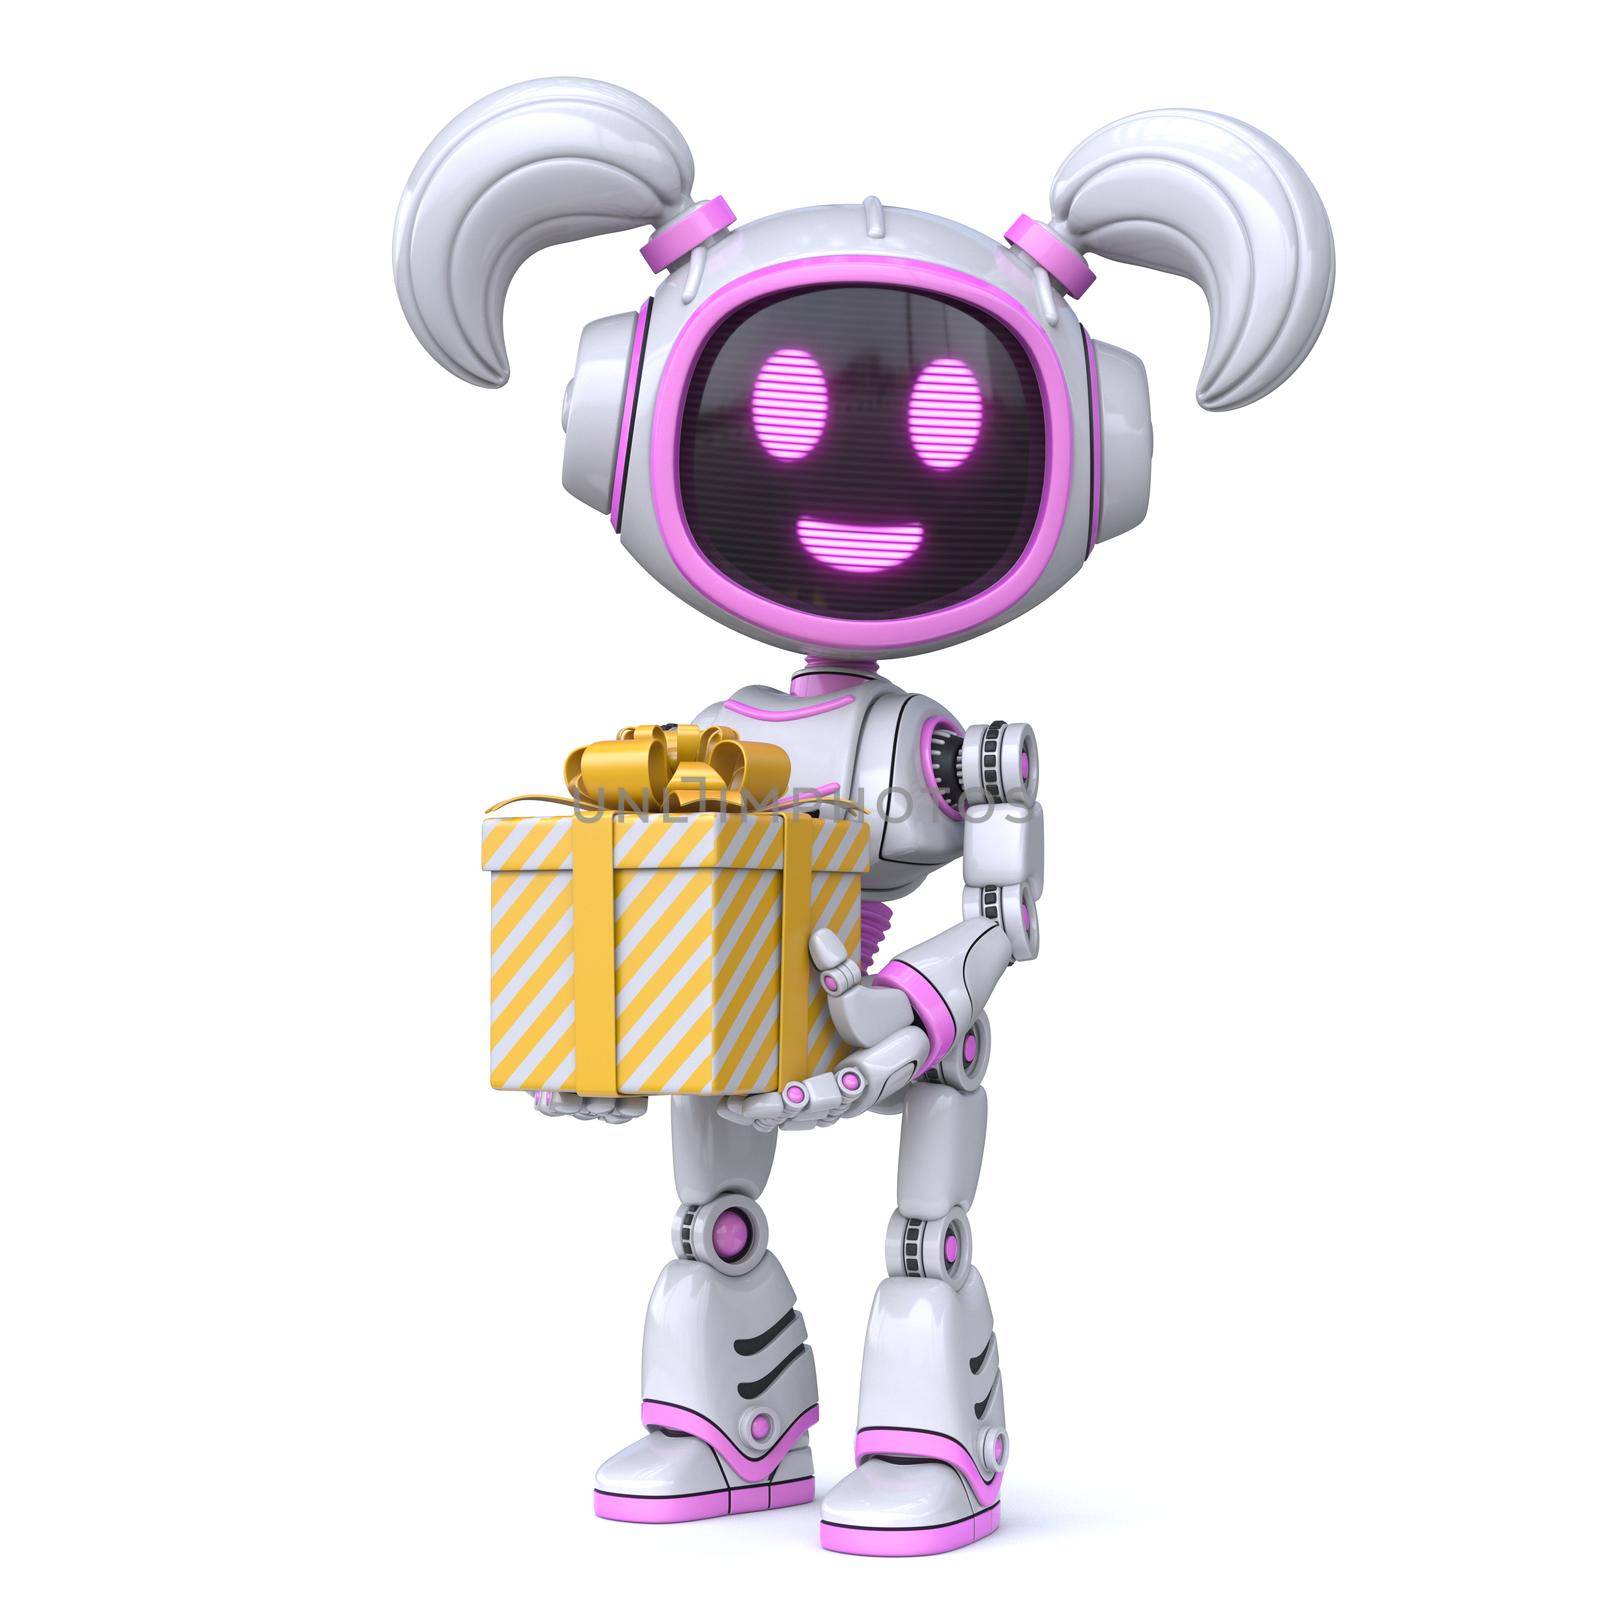 Cute pink girl robot holding small gift box 3D rendering illustration isolated on white background